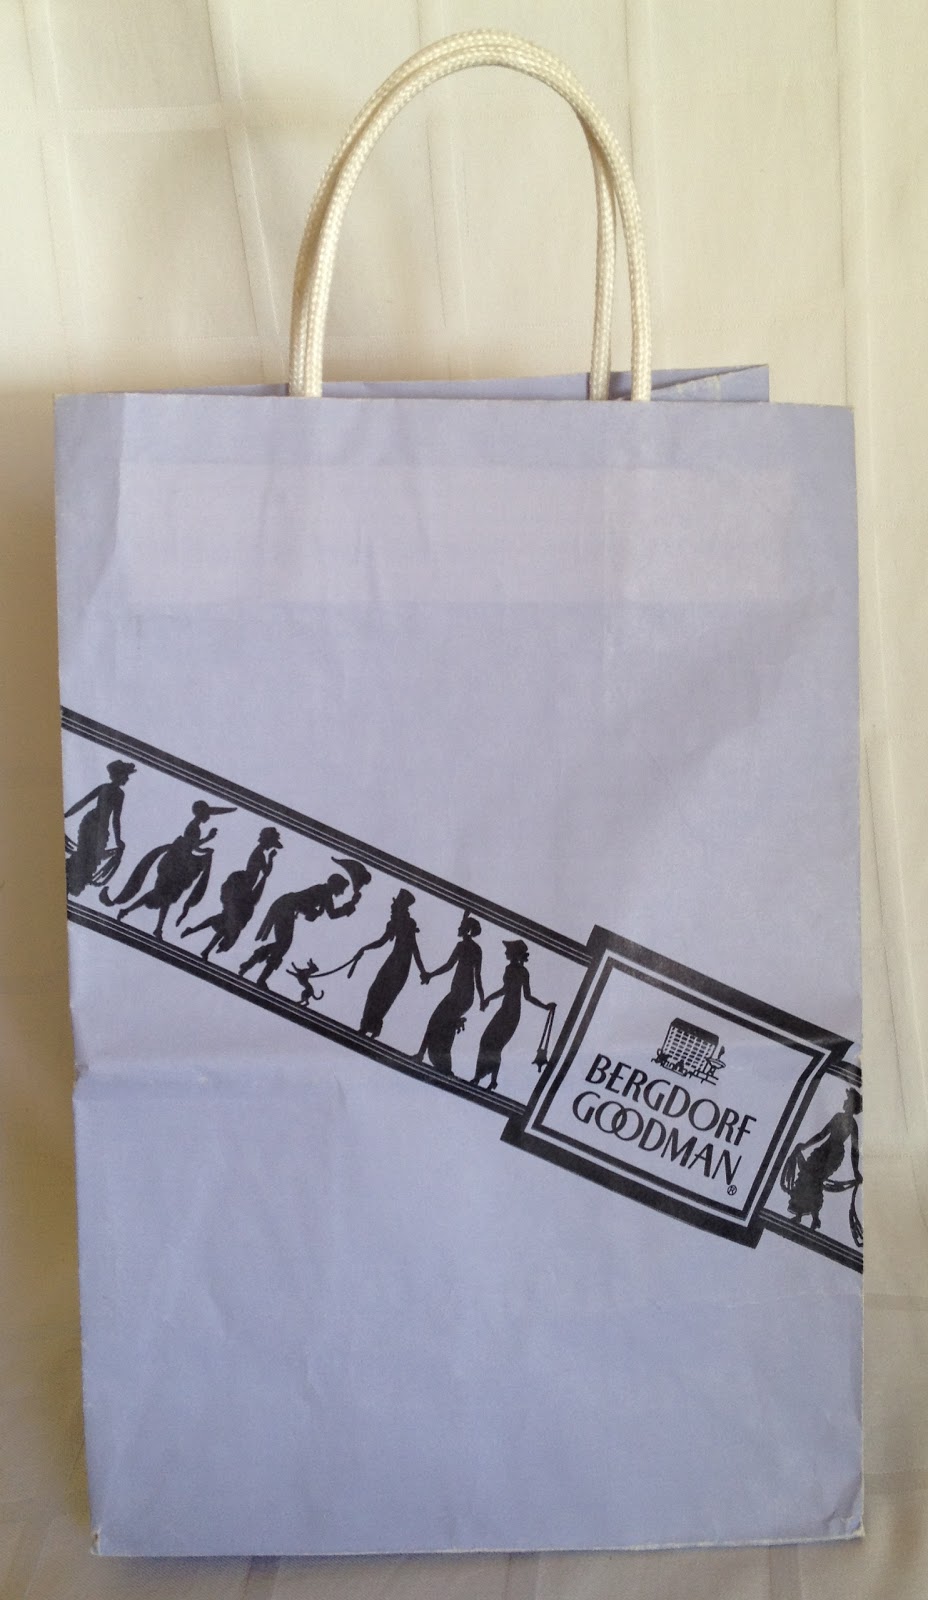 NEW Authentic Bergdorf Goodman Paper Shopping Gift Bag